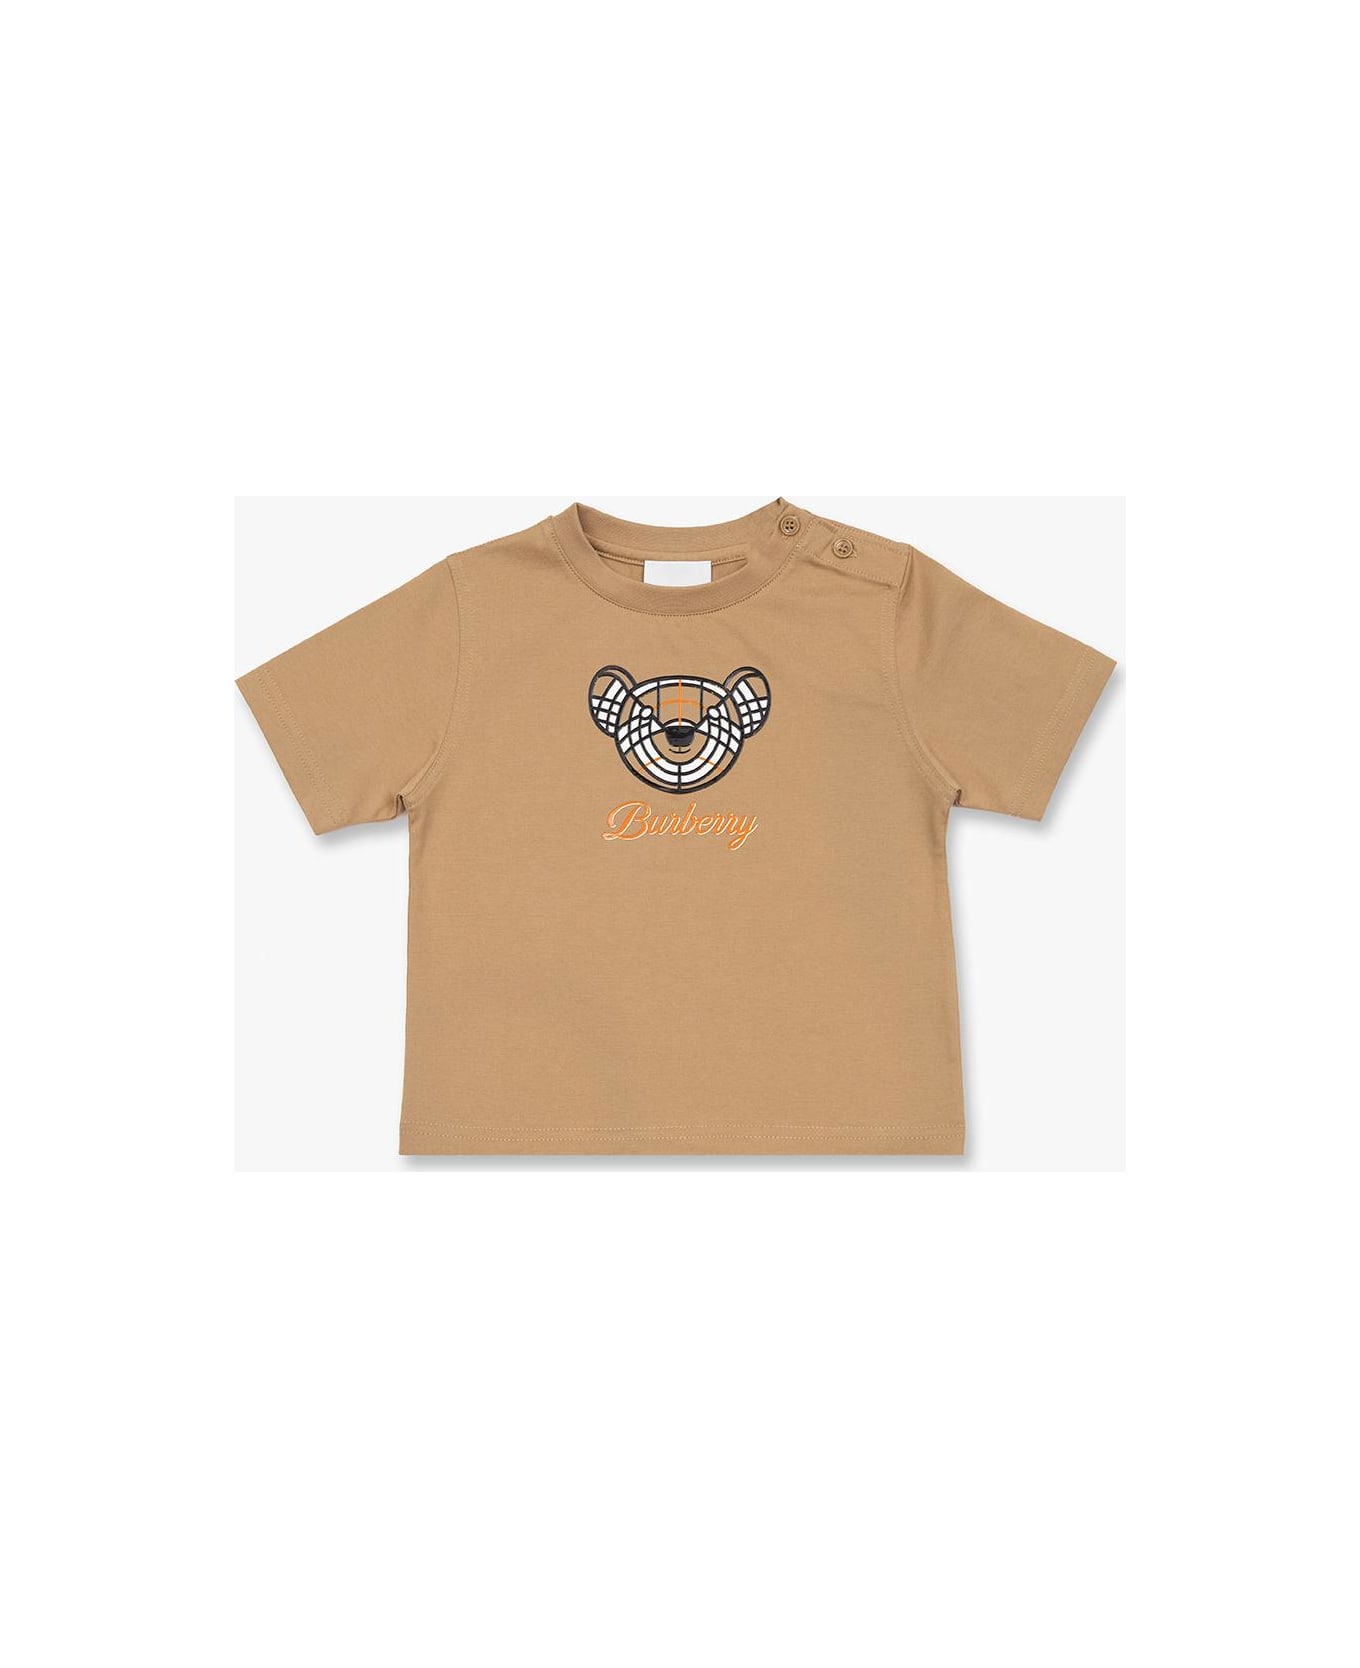 Burberry Printed T-shirt - Archive beige